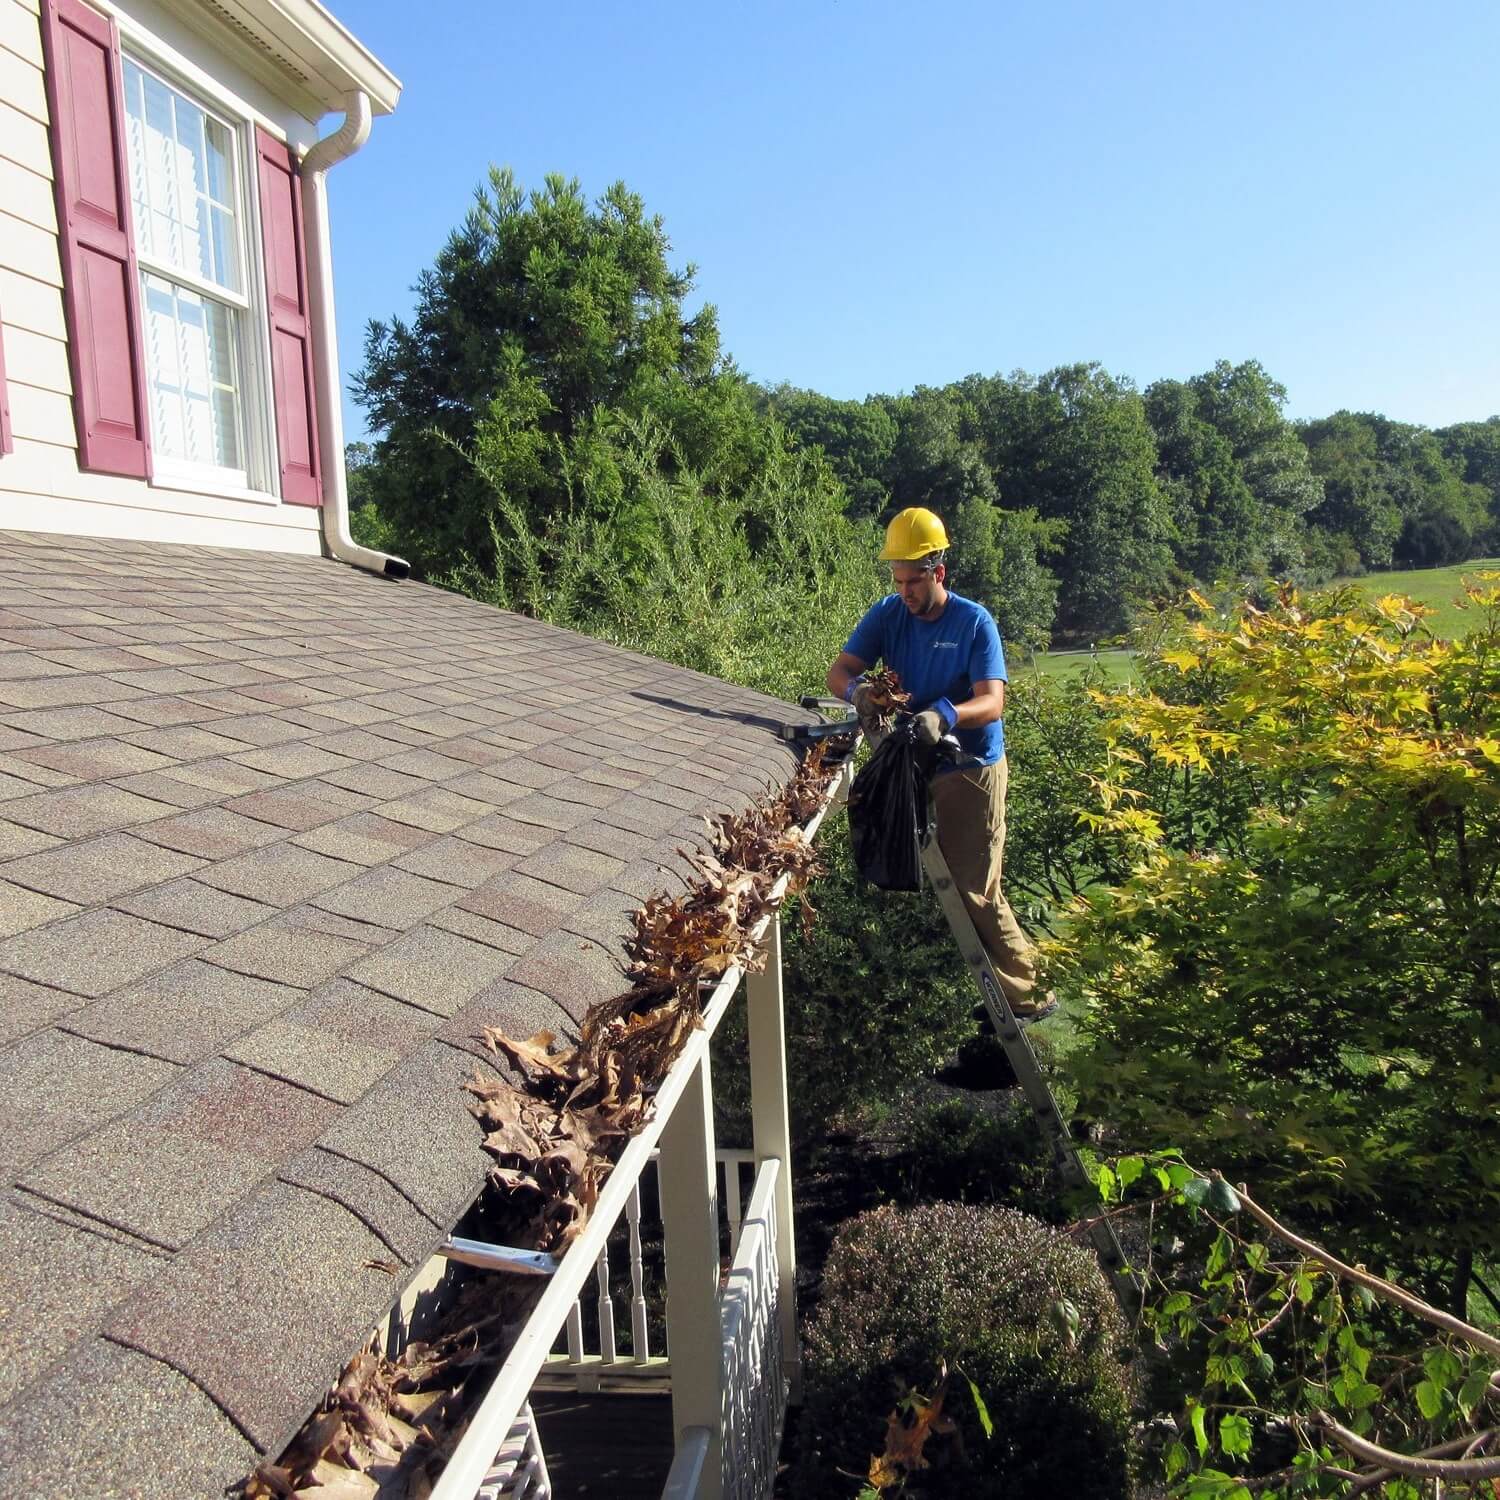 Gutter Cleaning Near You